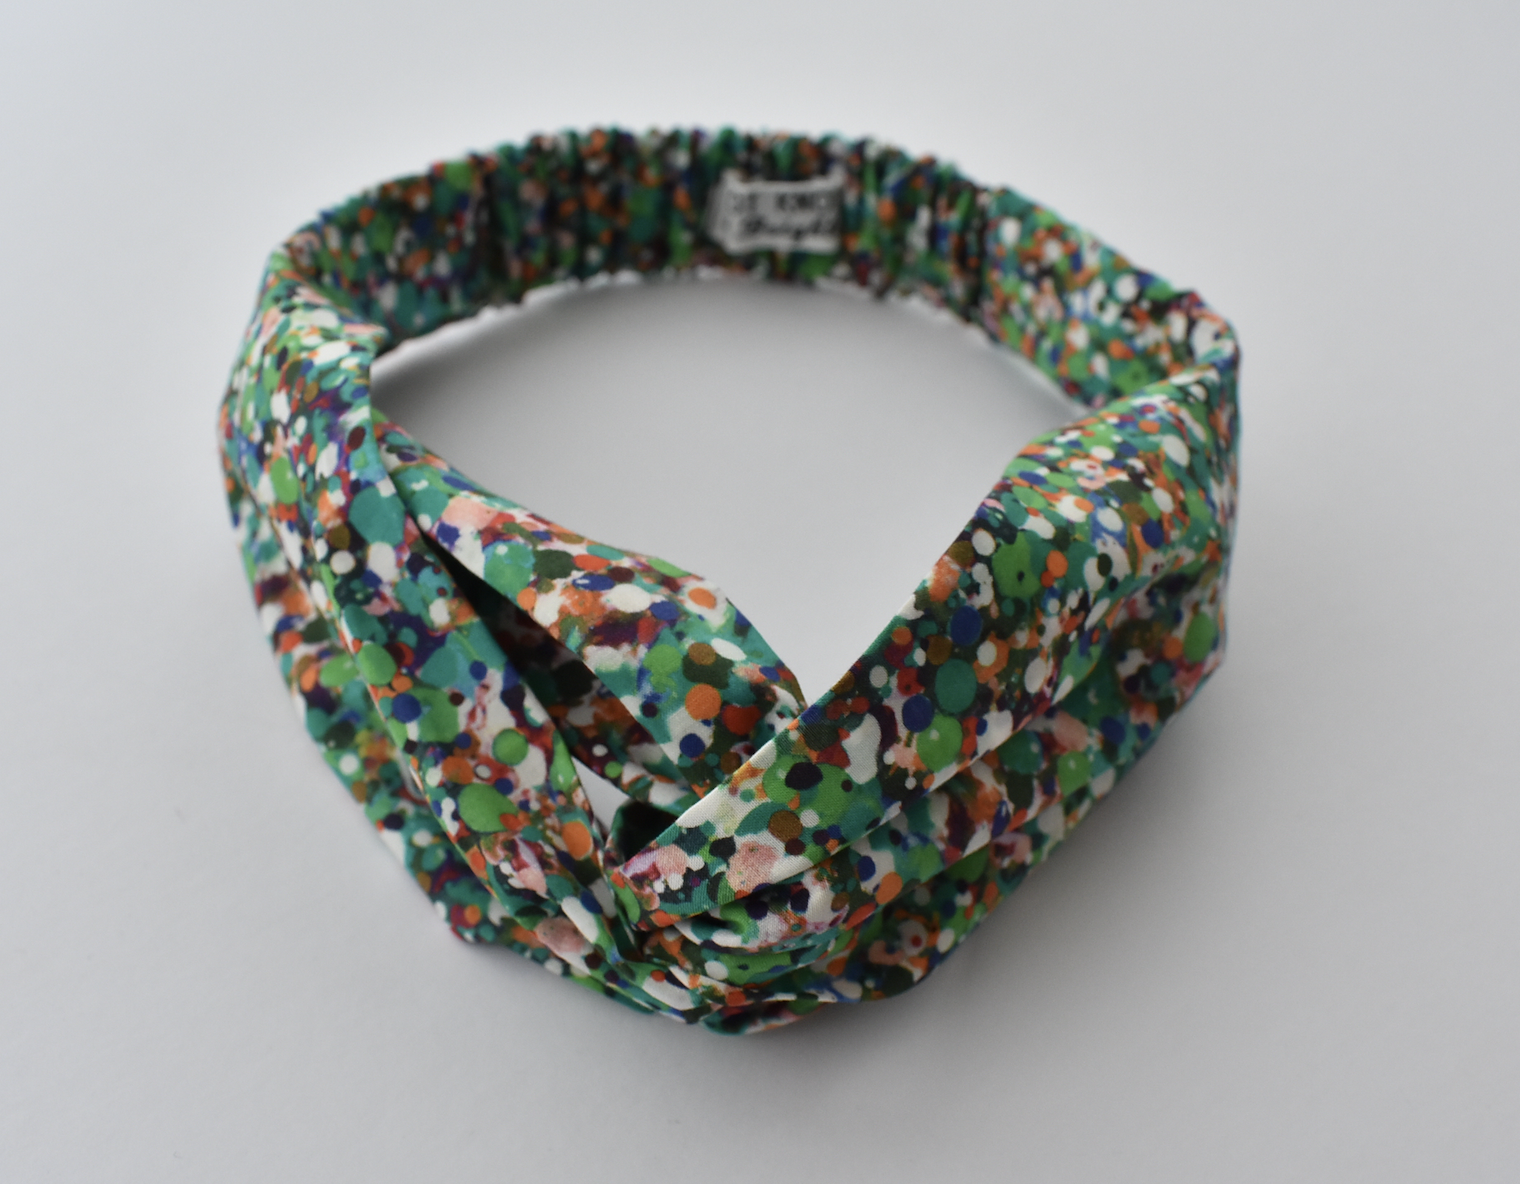 Kids Tot Knot Twisted hairband - Green Reflections Liberty of London print - Tot Knots of Brighton